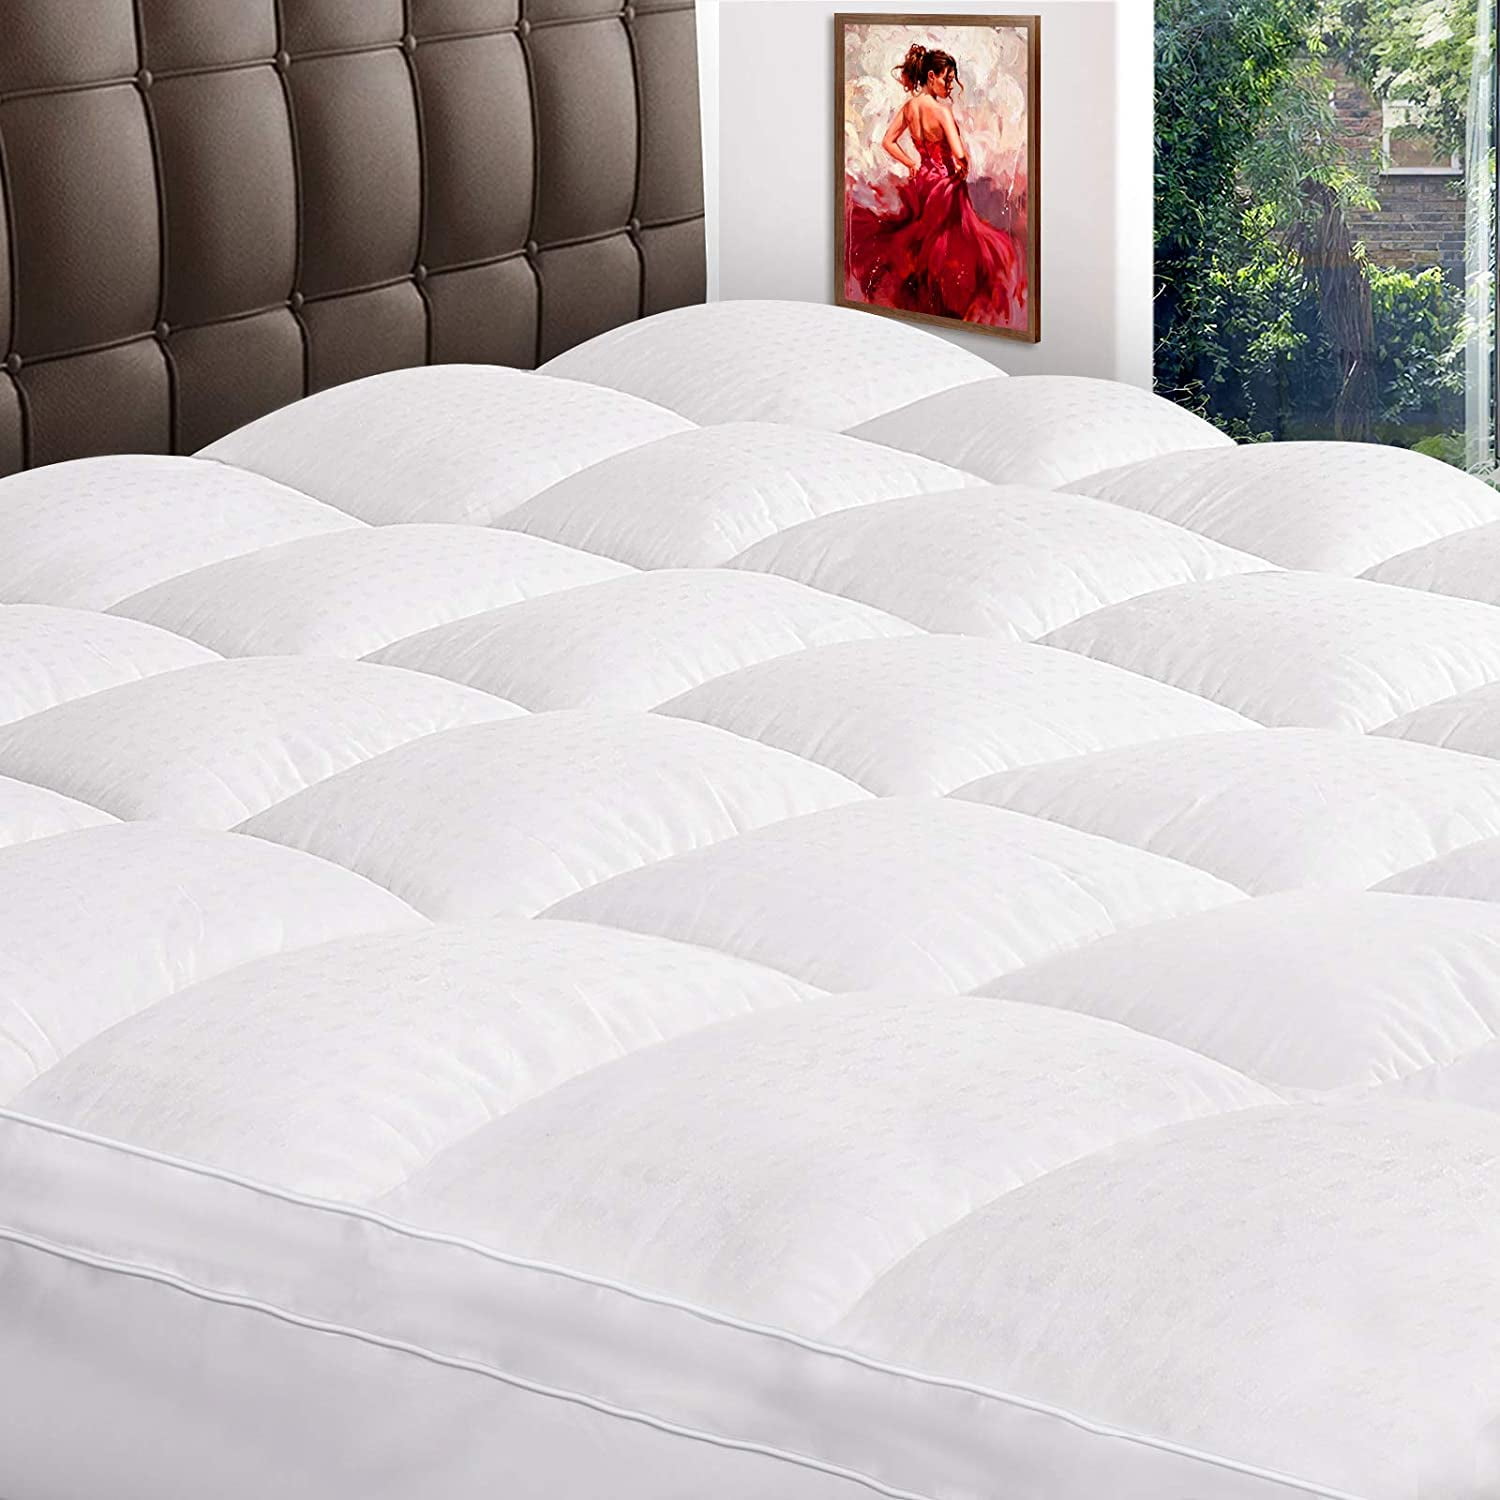 SLEEP COMFORT QUEEN Q BED MATTRESS PROTECTOR QUILTED STRAP FIT COTTON COVER 